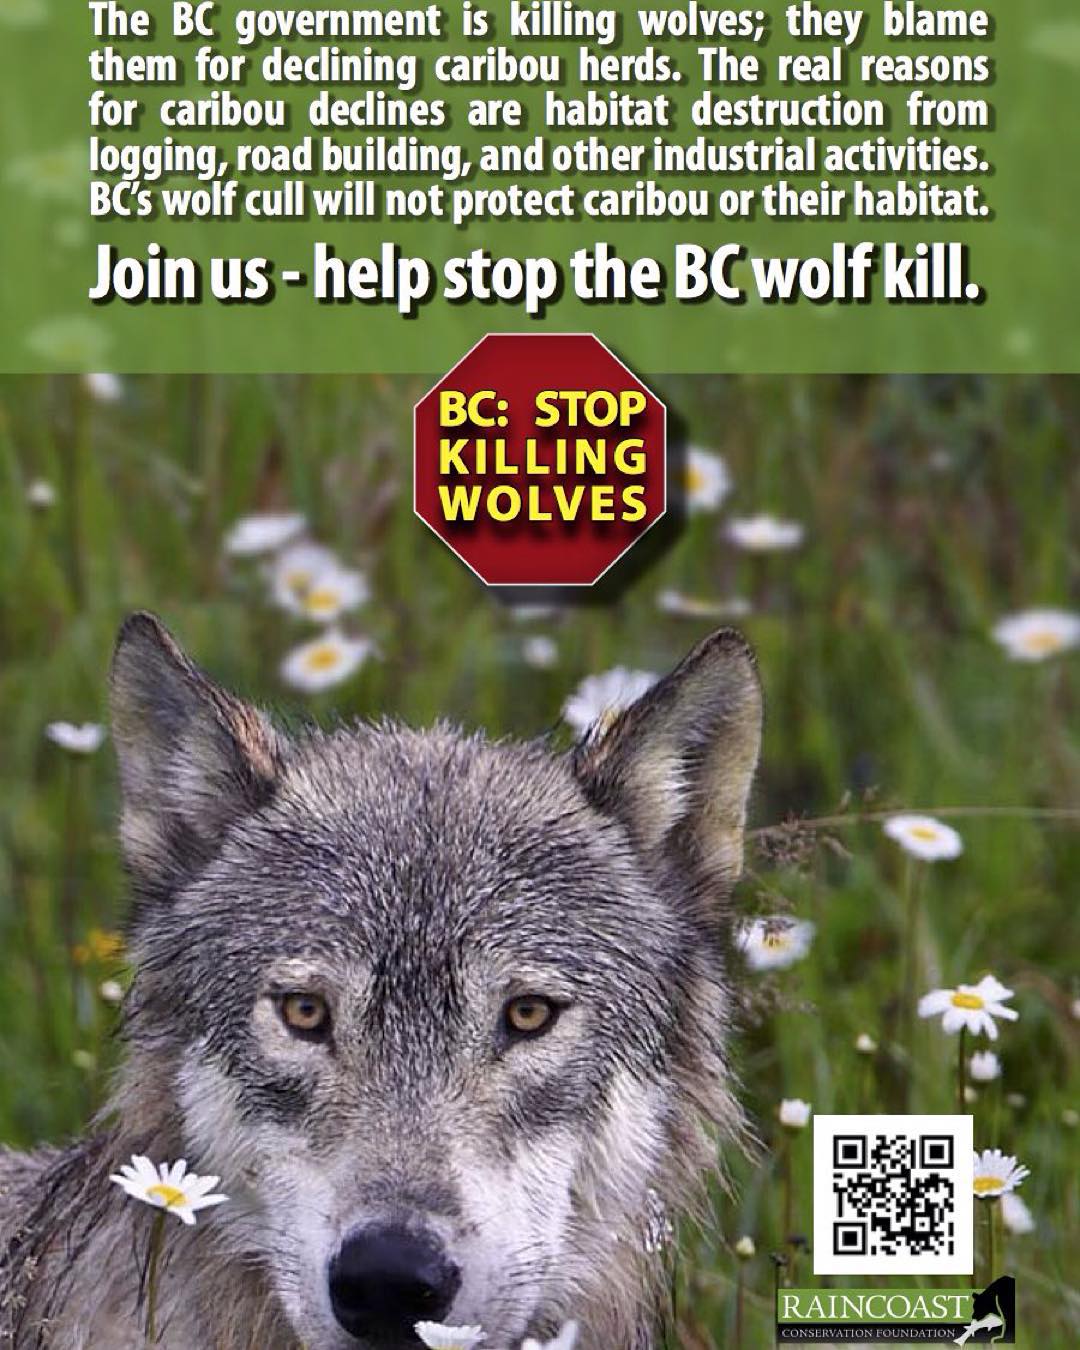 Advertisement poster by Raincoast Conservation against BC government culling wolves